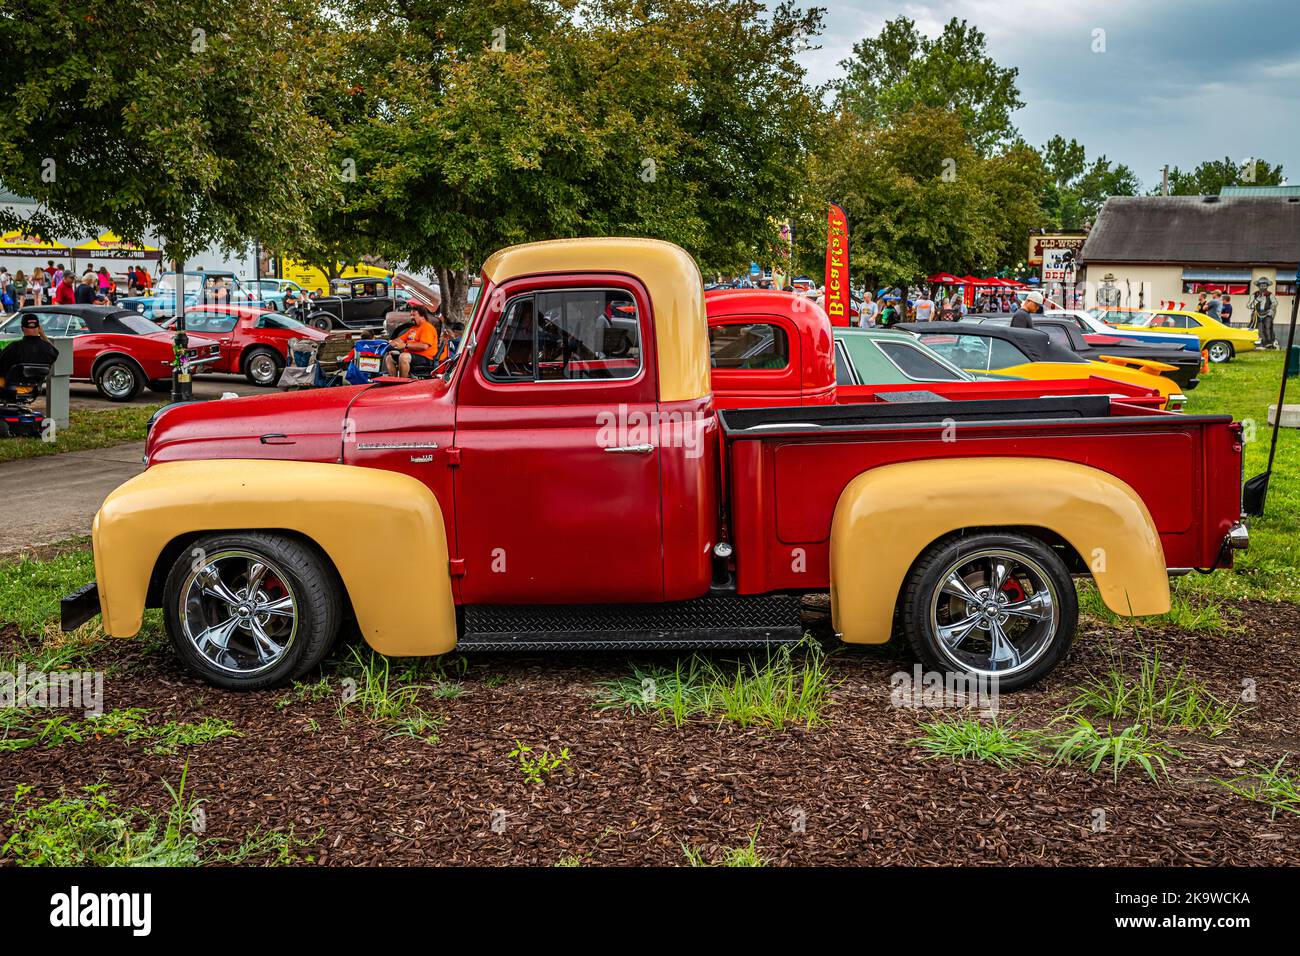 Des Moines, IA - July 01, 2022: High perspective side view of a 1952 International Harvester L110 Pickup Truck at a local car show. Stock Photo